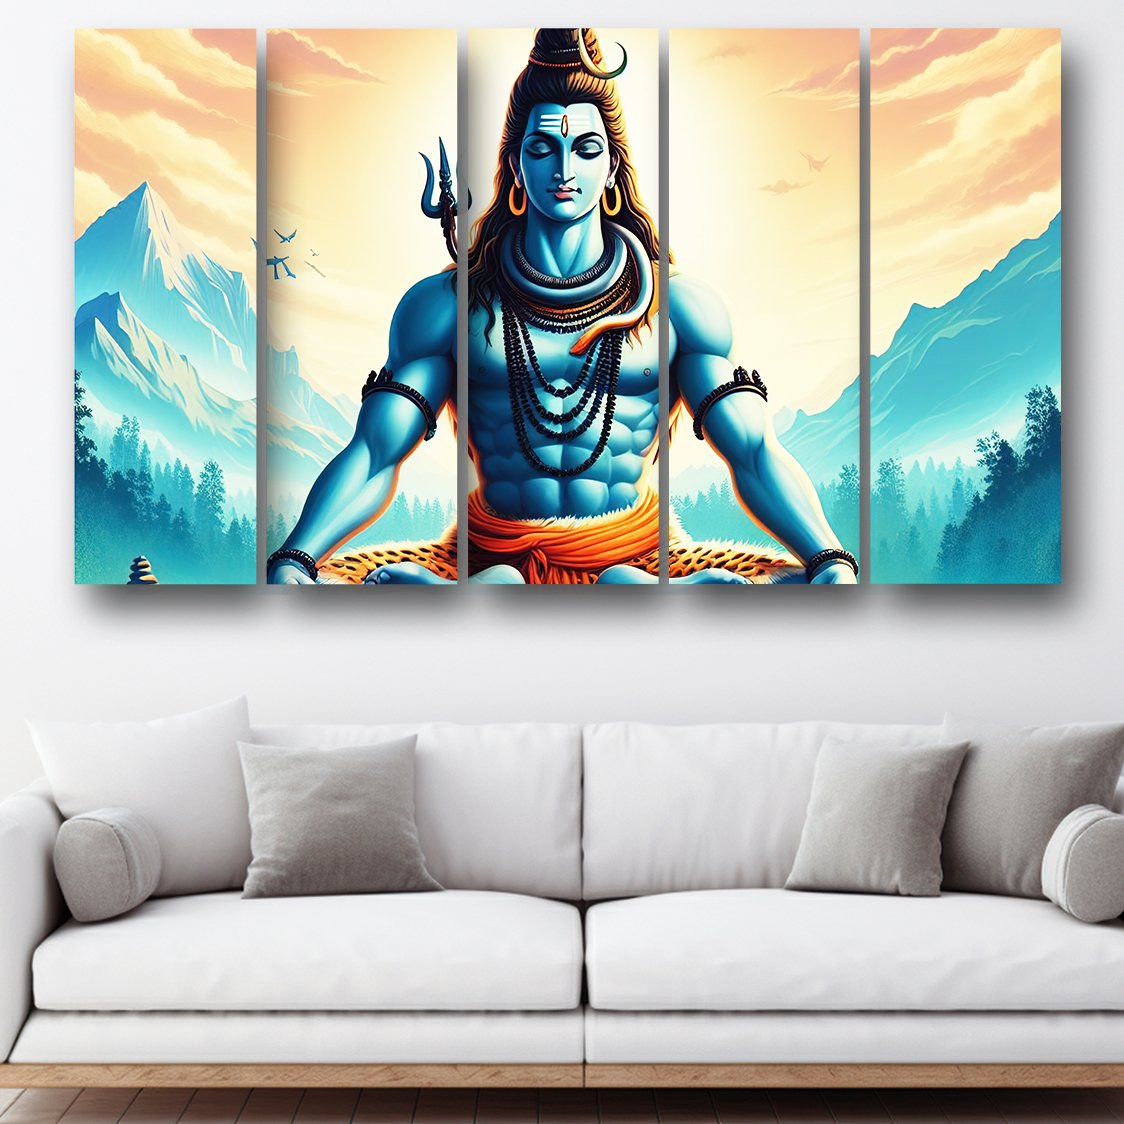 Casperme Lord Shiv Wall Painting For Living Room for Bedroom, Hotels & Office Decoration (48×30 inhes)